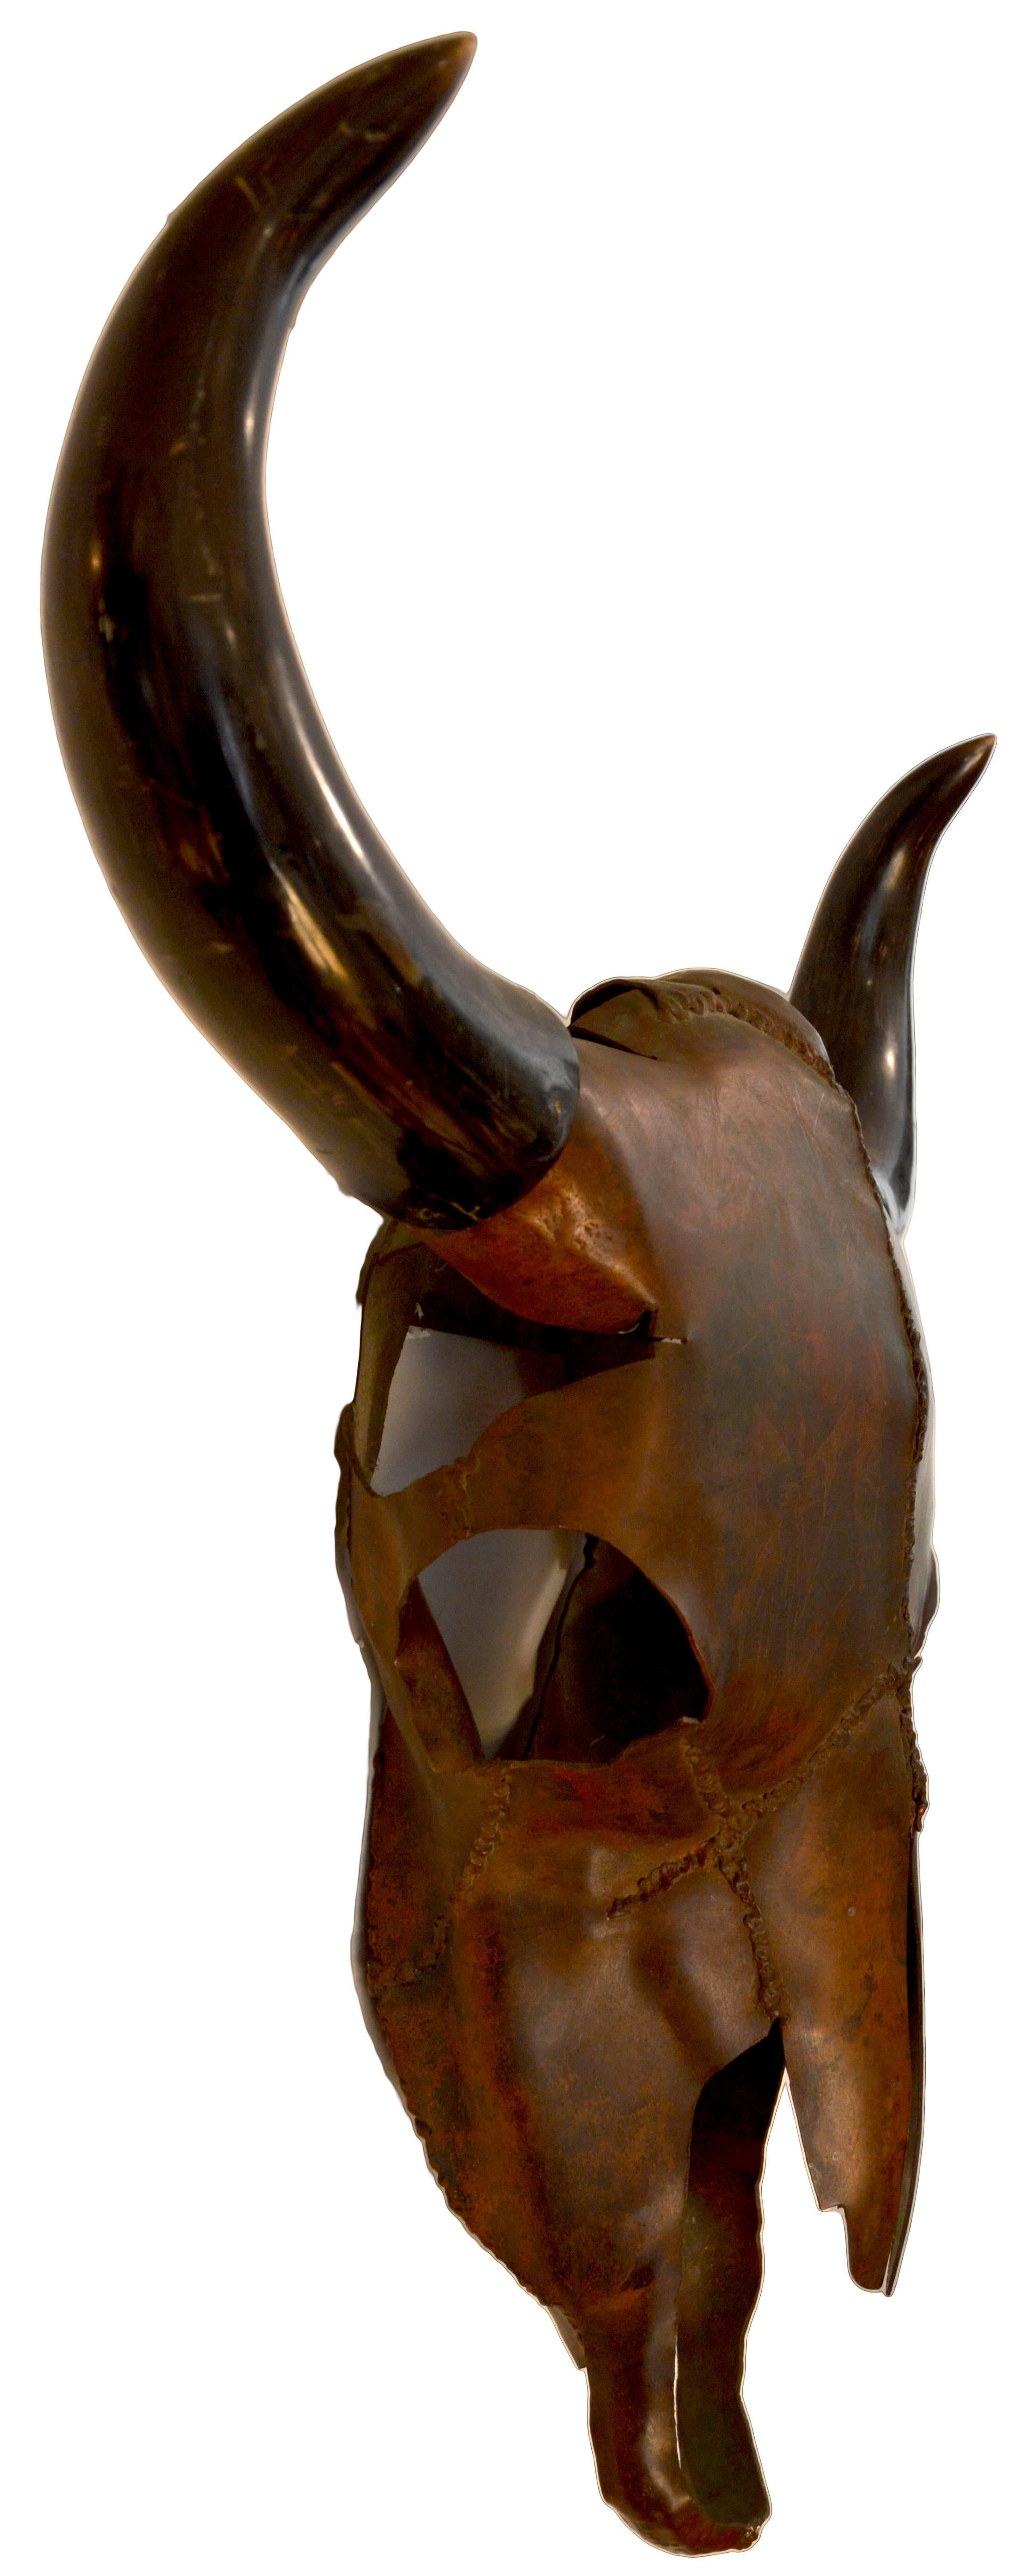 North American Copper Bison Head Sculpture, Signed and Dated 1977